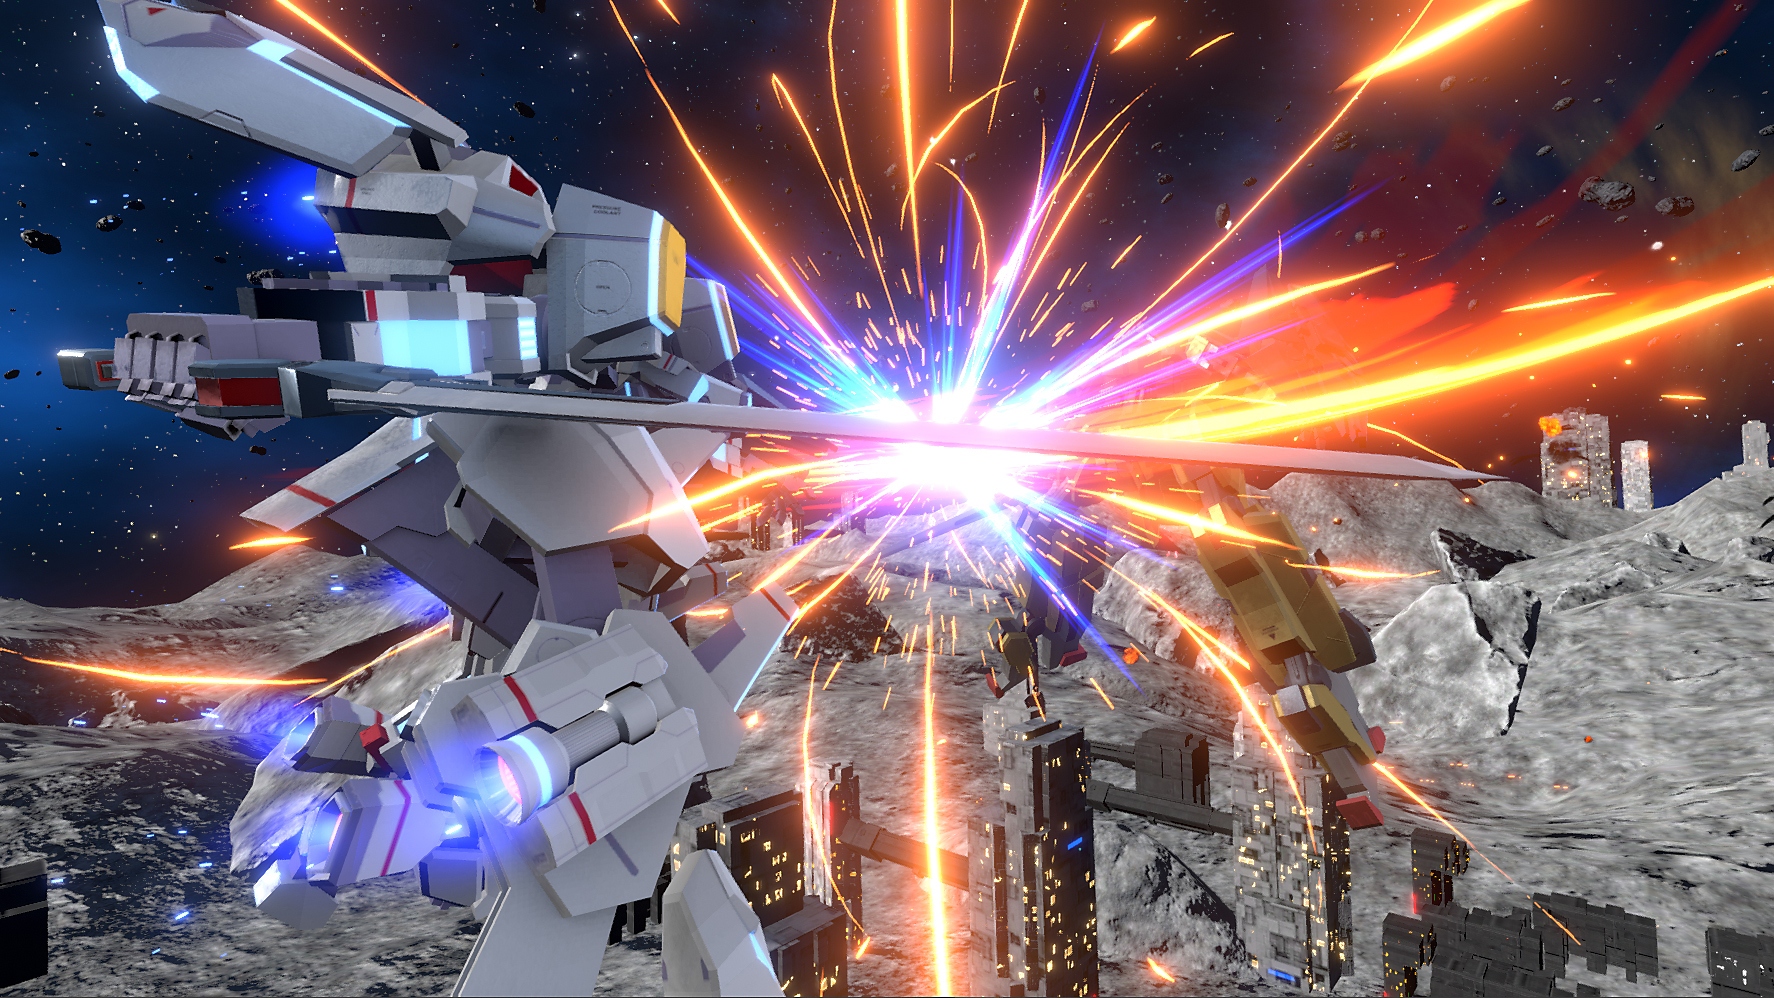 Relayer screenshot showing Stellar Gear, a large humanoid mech suit with a large sword, on a moon-like surface